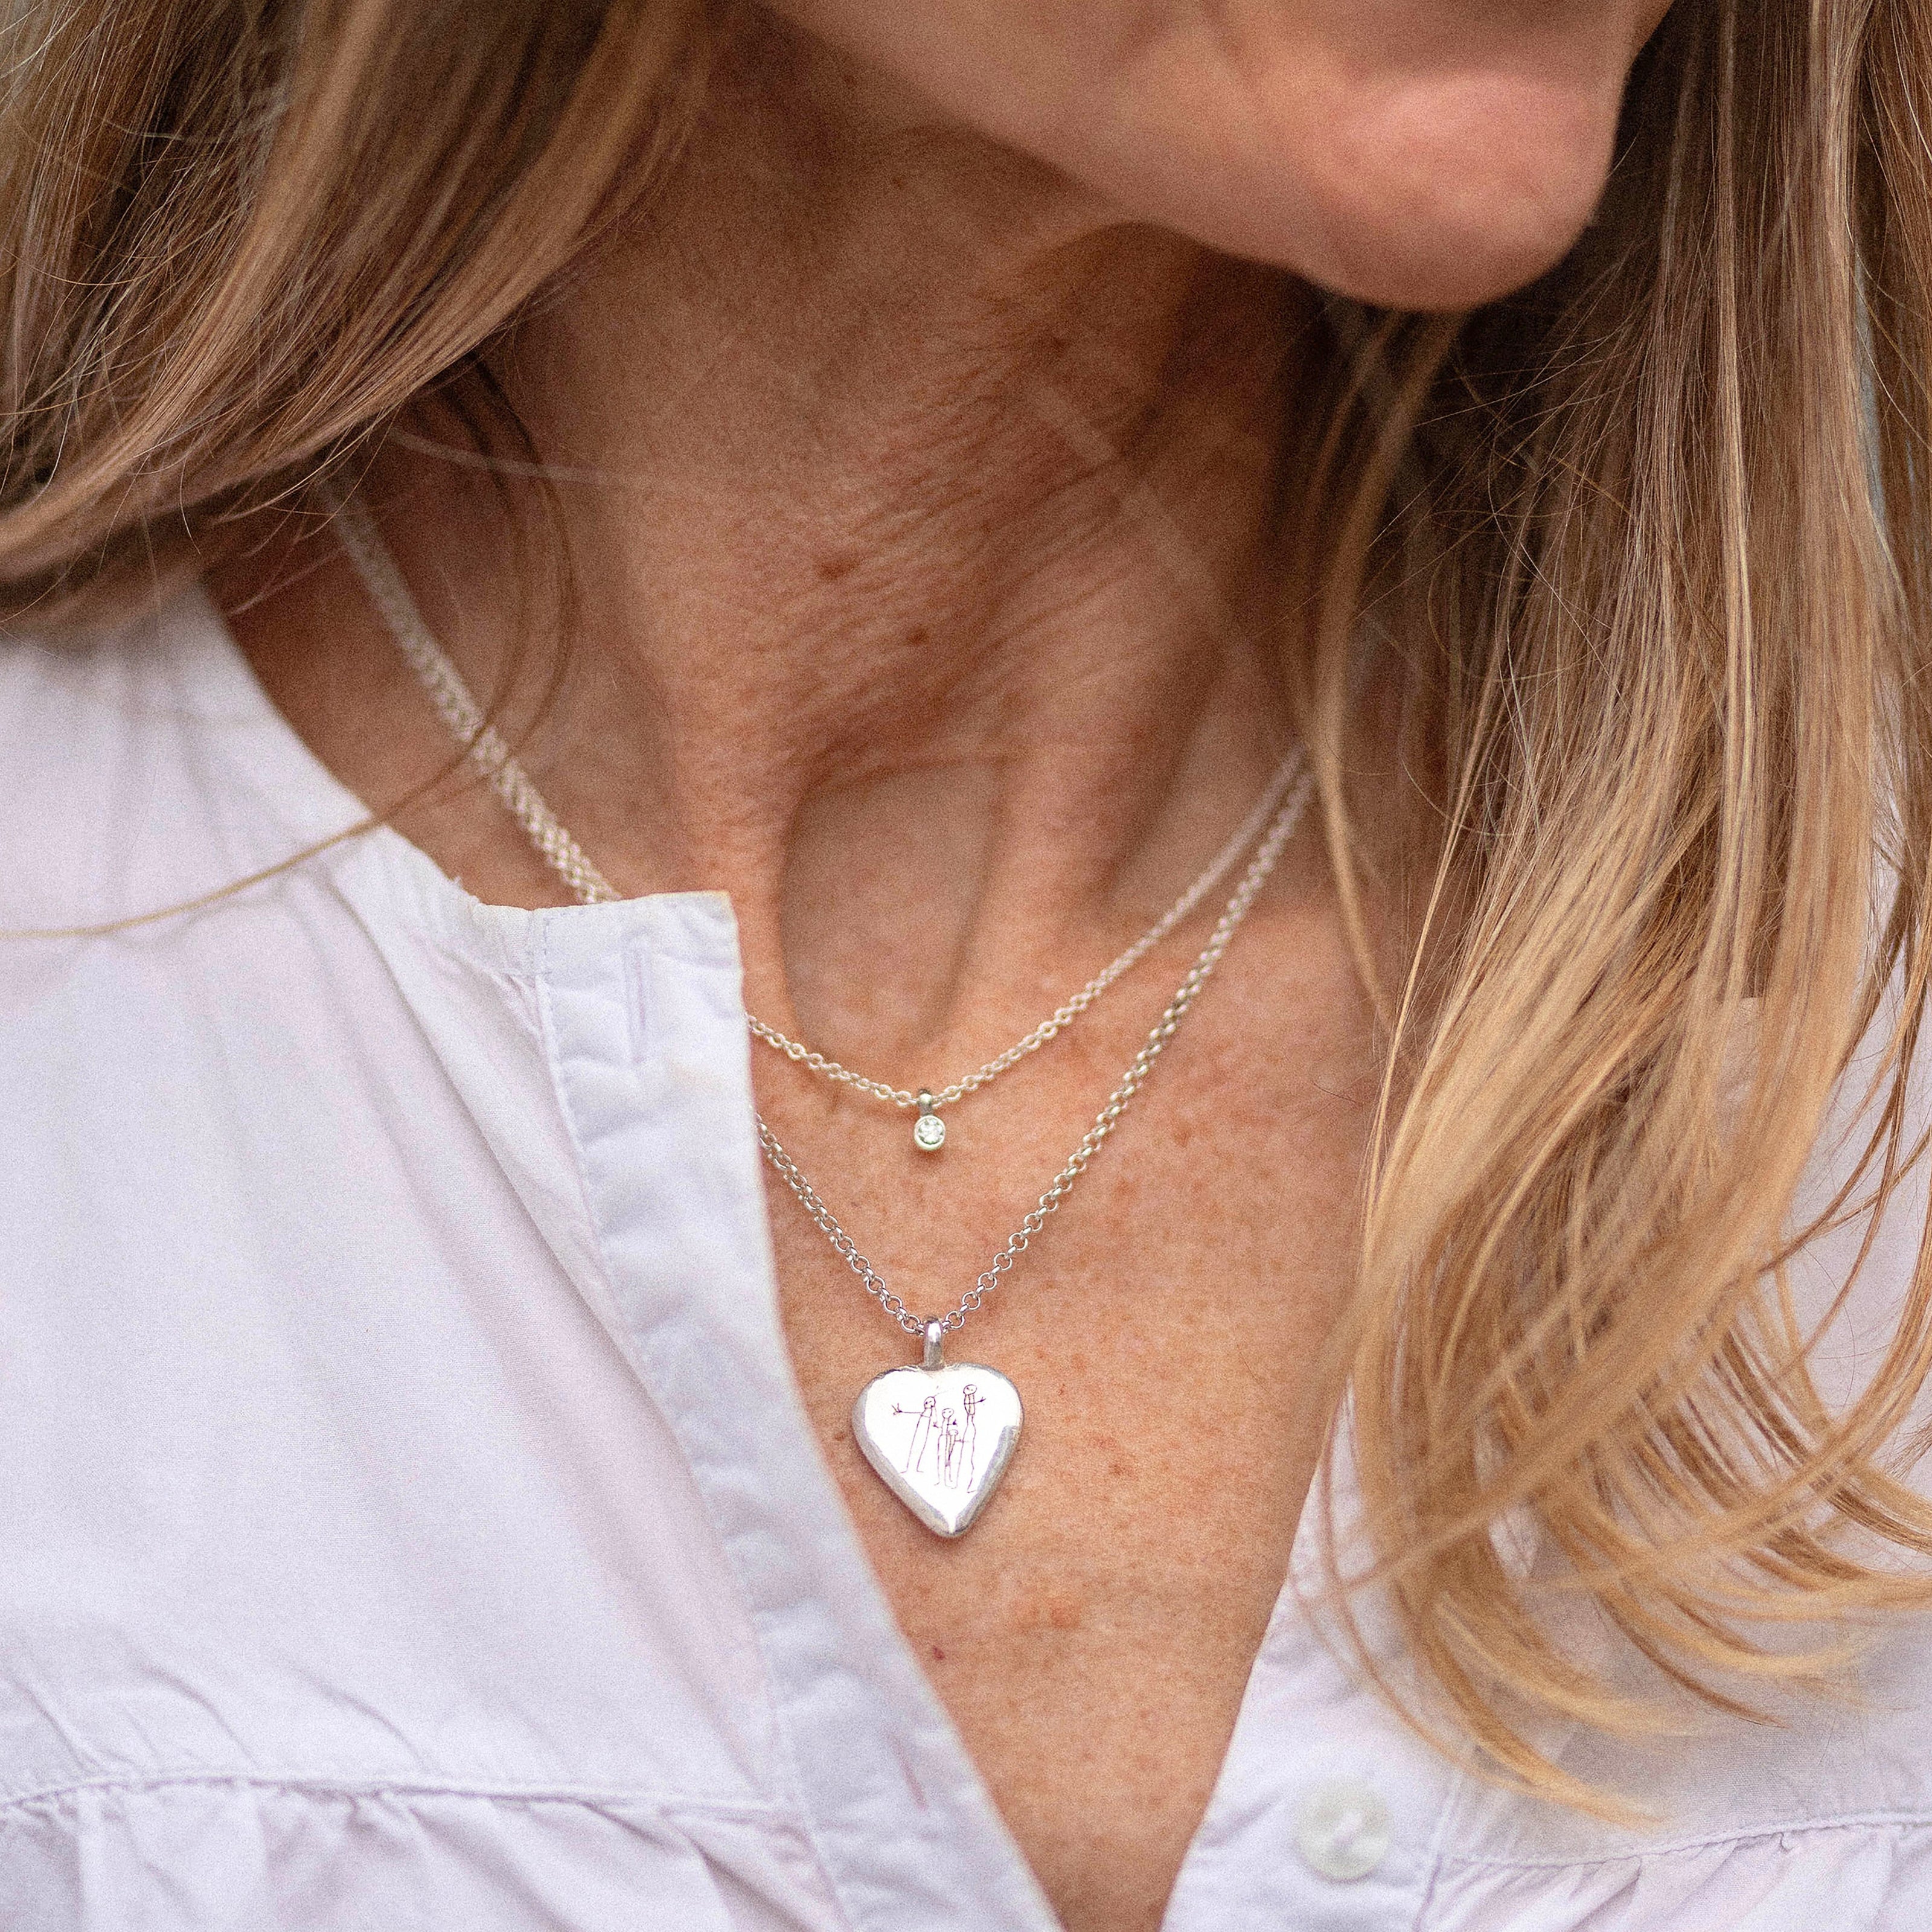 Silver Large Happy Heart Necklace with Handwriting